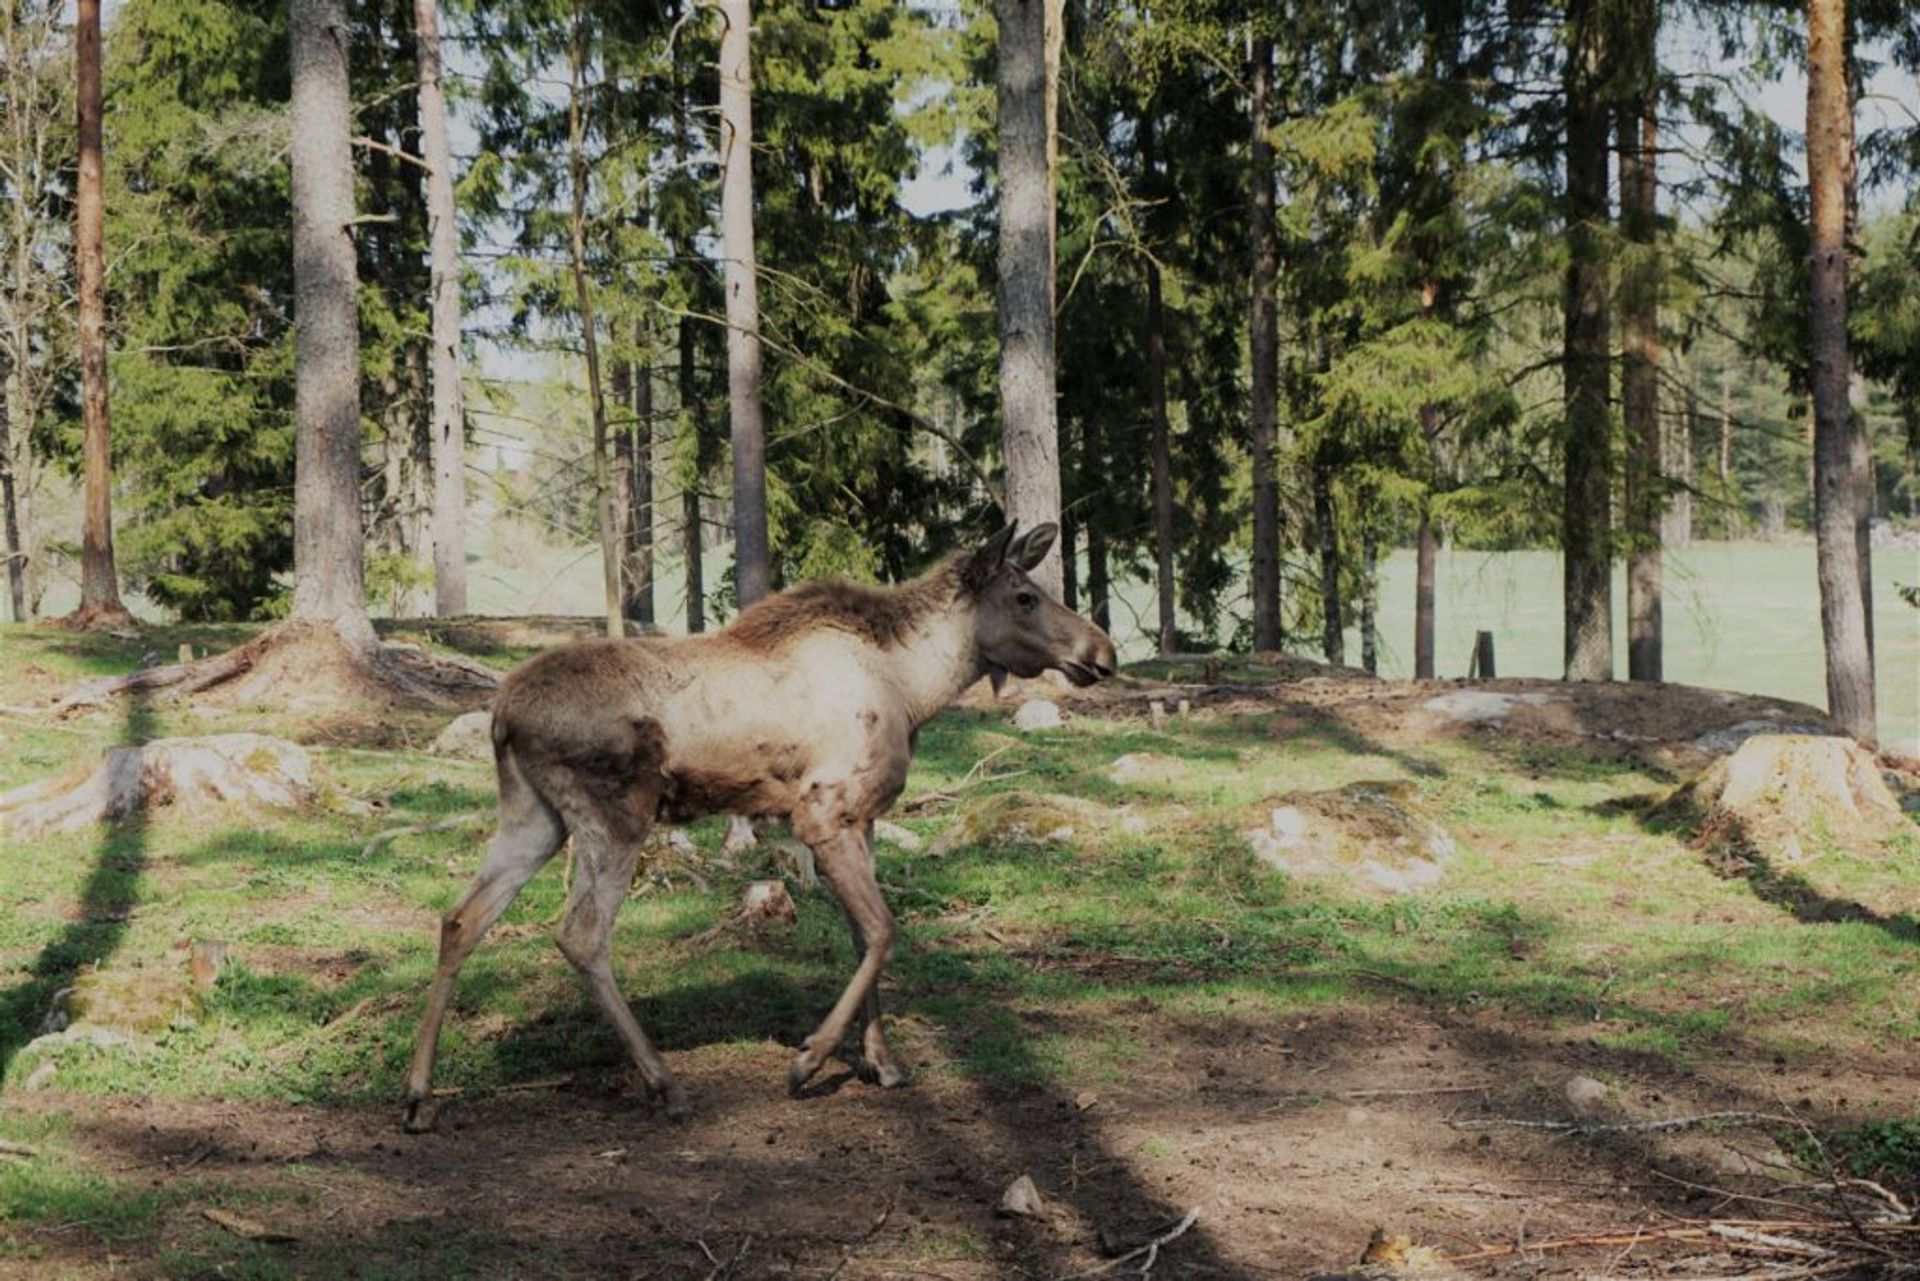 A young moose walking through a forest.